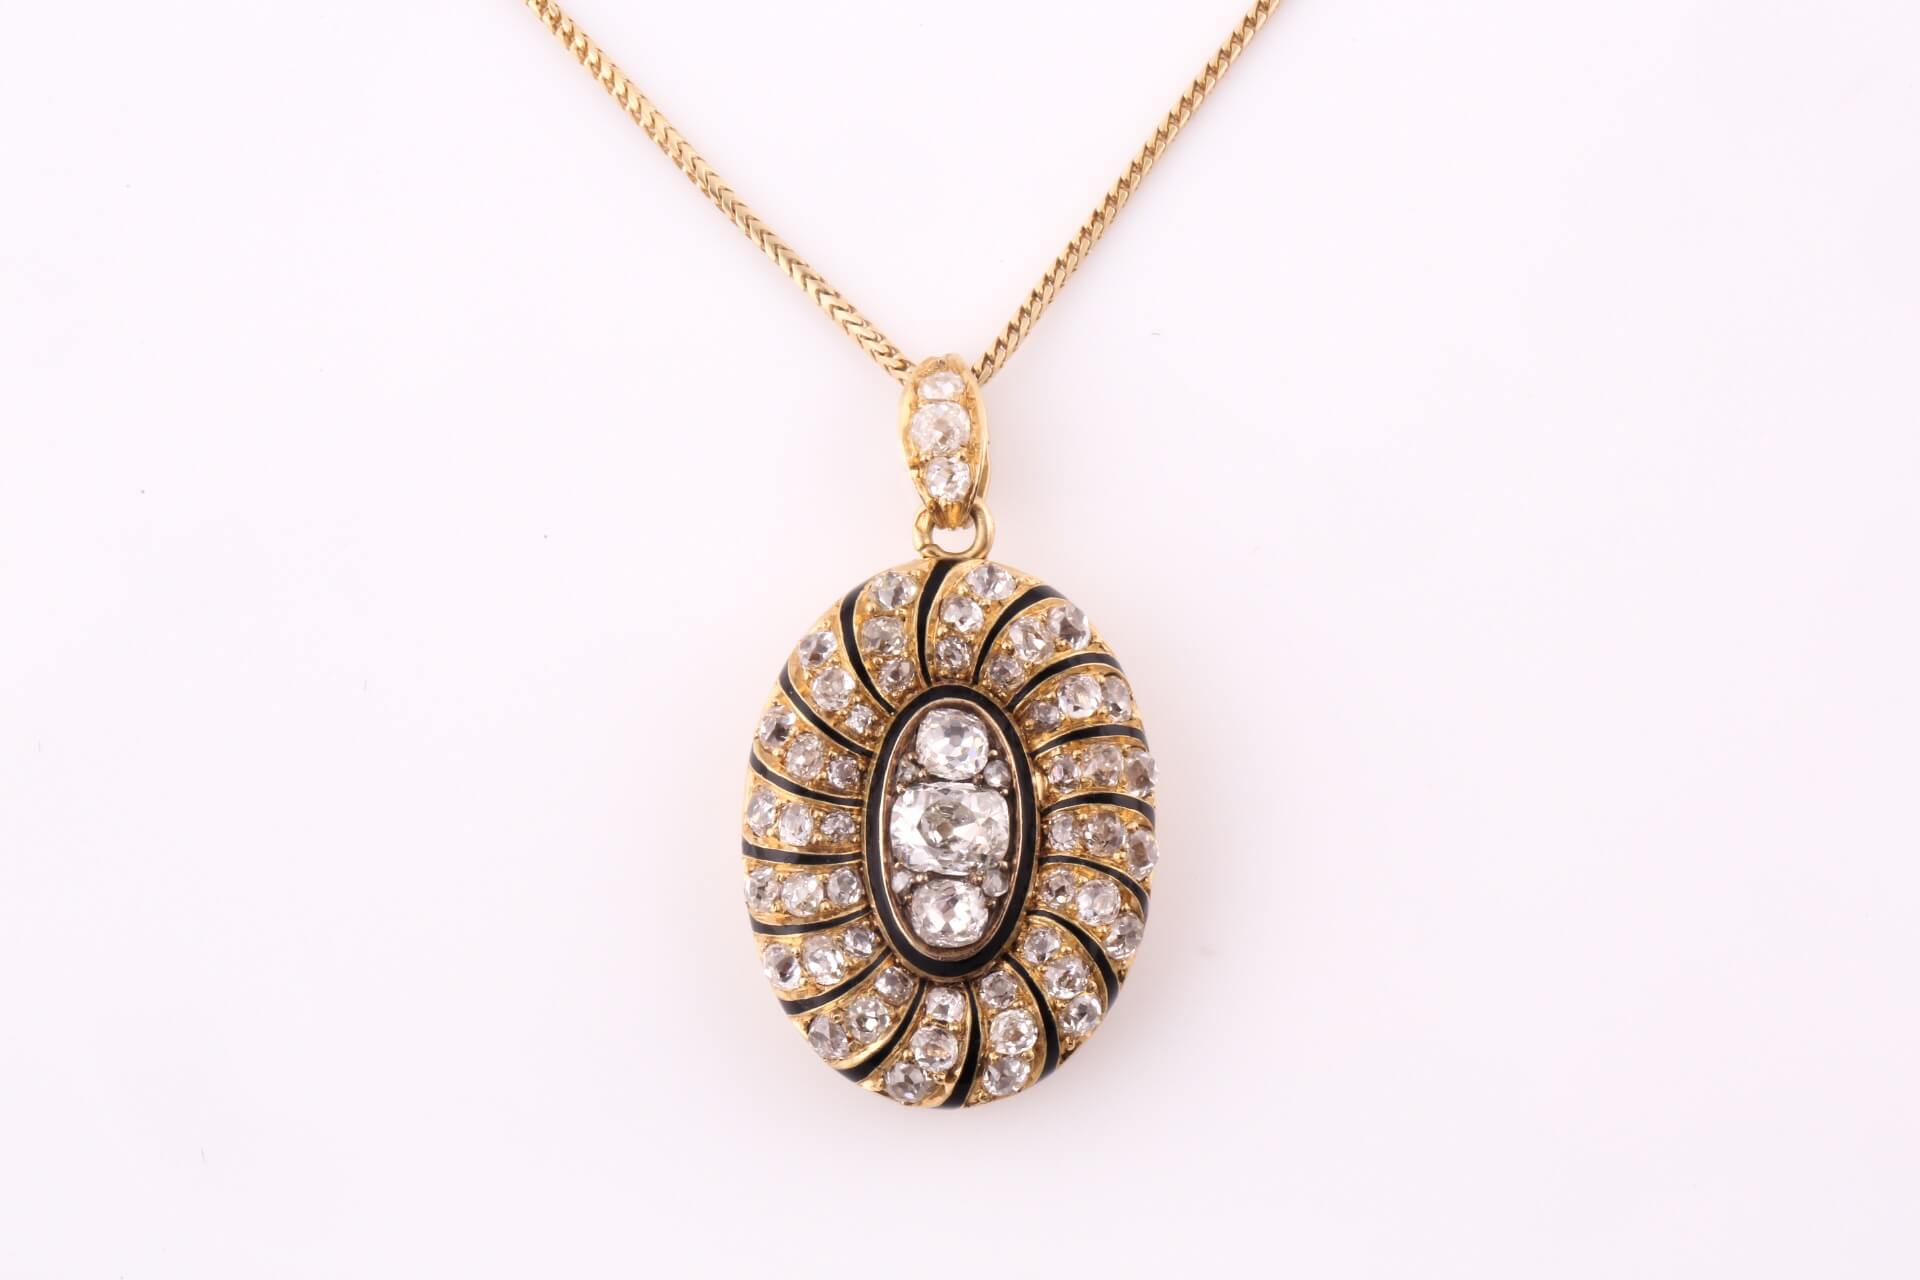 A late 19th century French oval locket/pendant